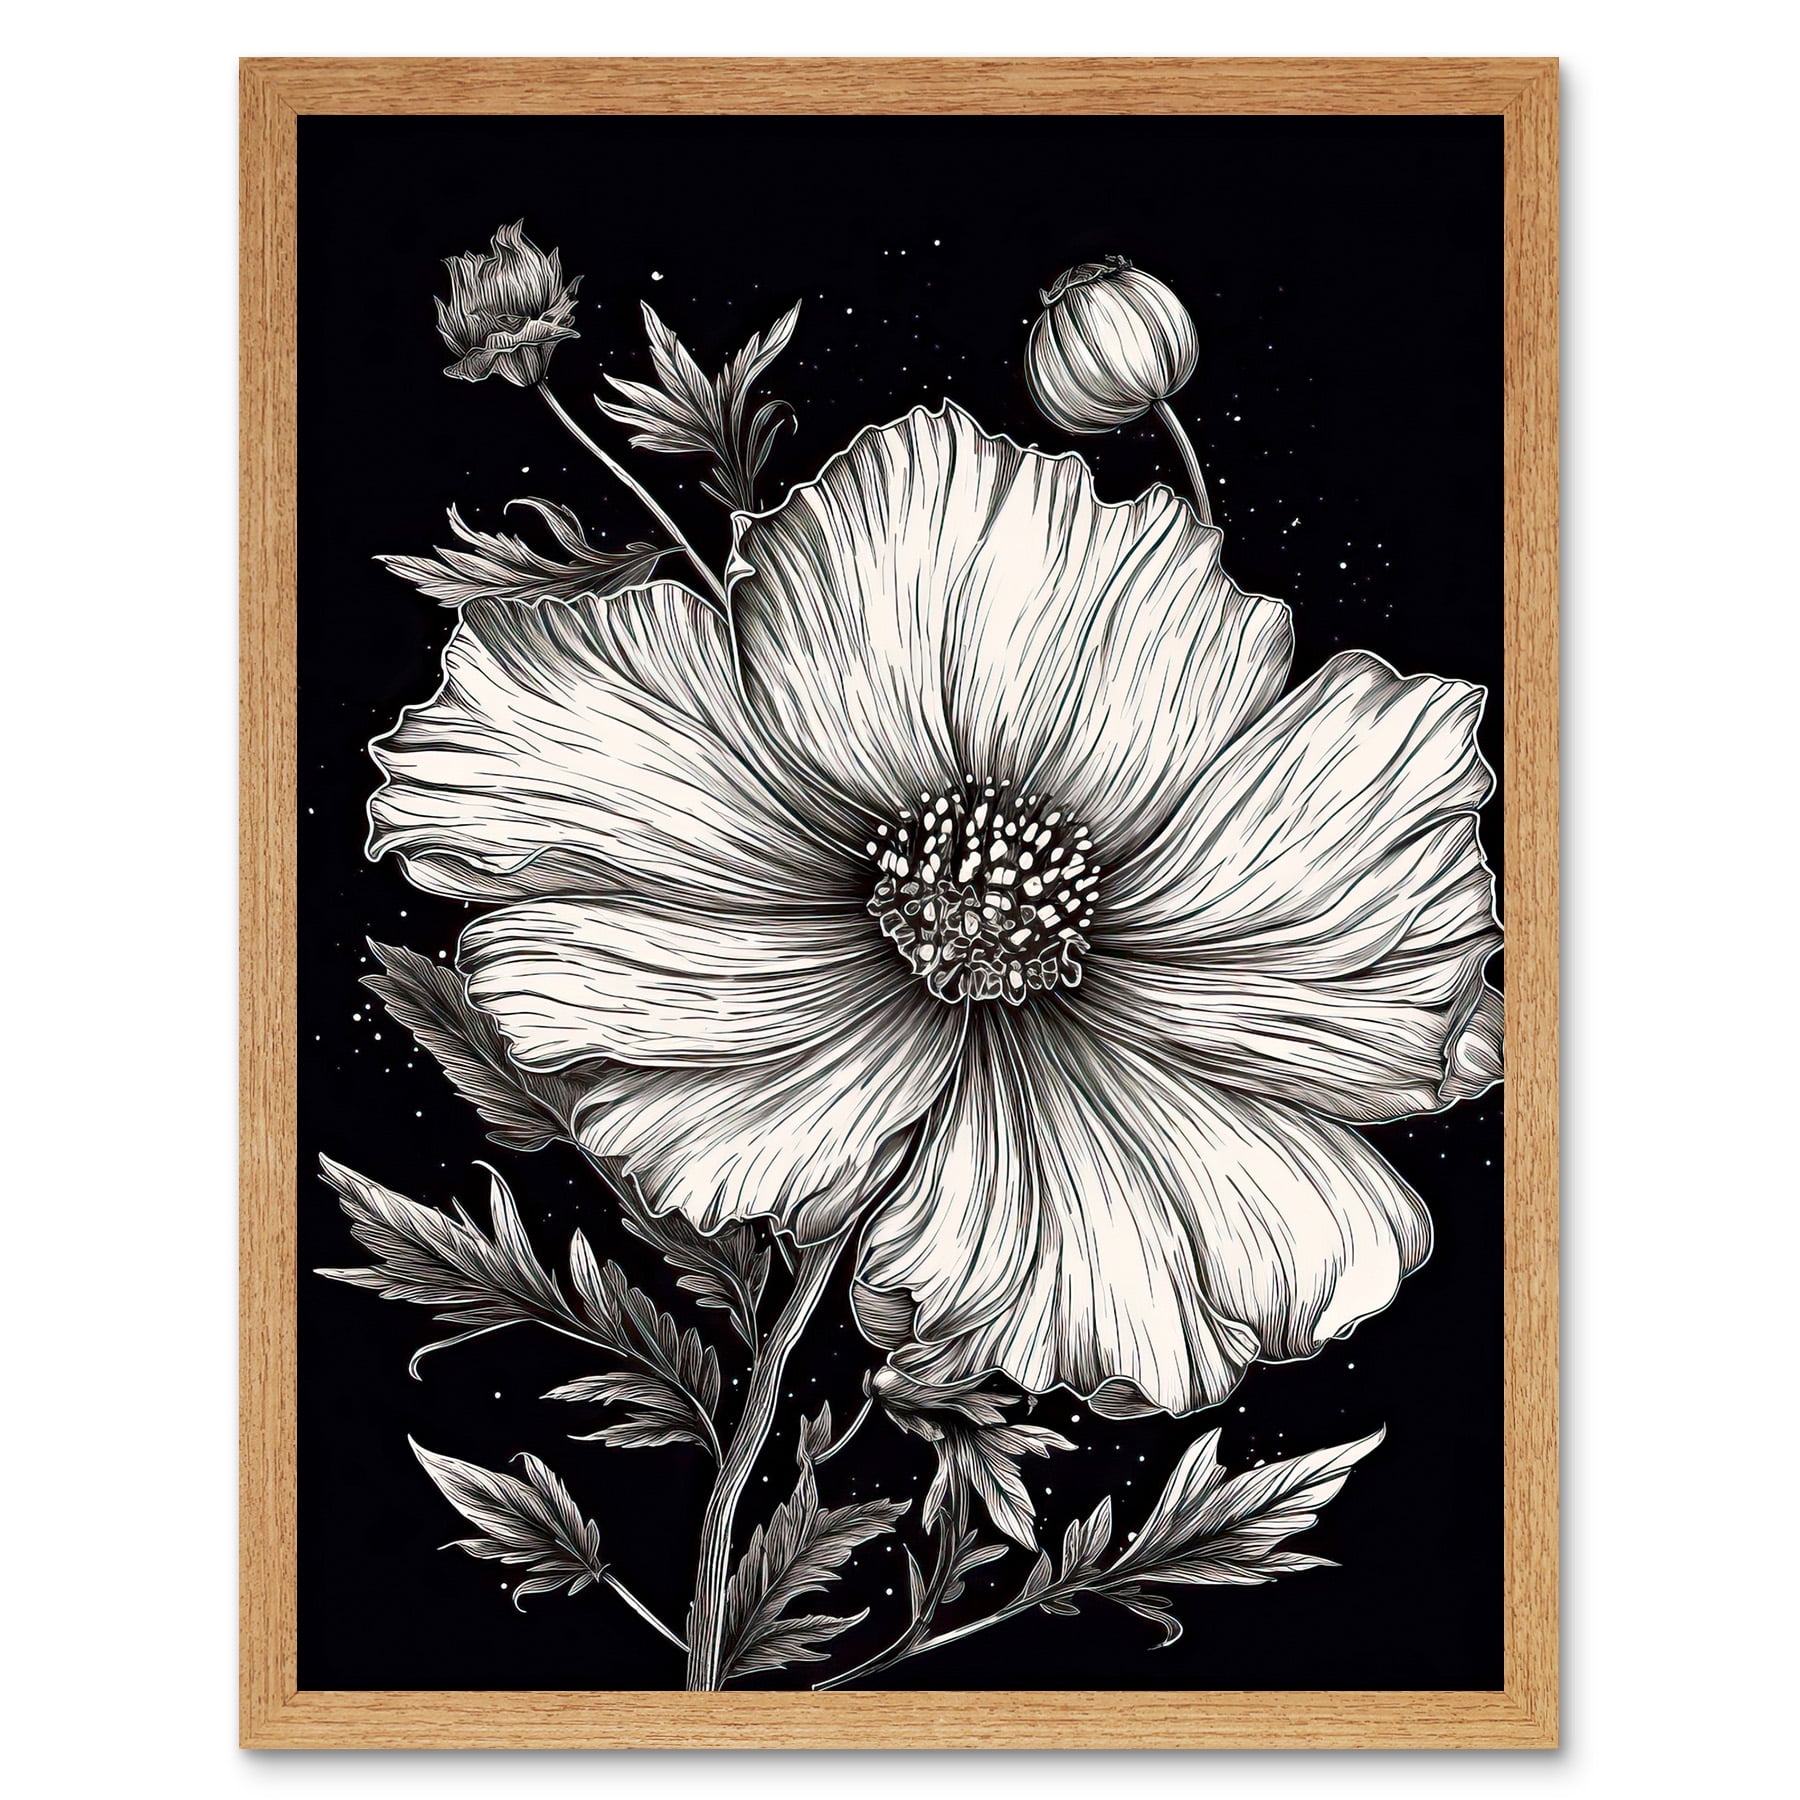 Black and White Cosmos Flower and Starry Night Sky Art Print Framed Poster  Wall Decor 12x16 inch